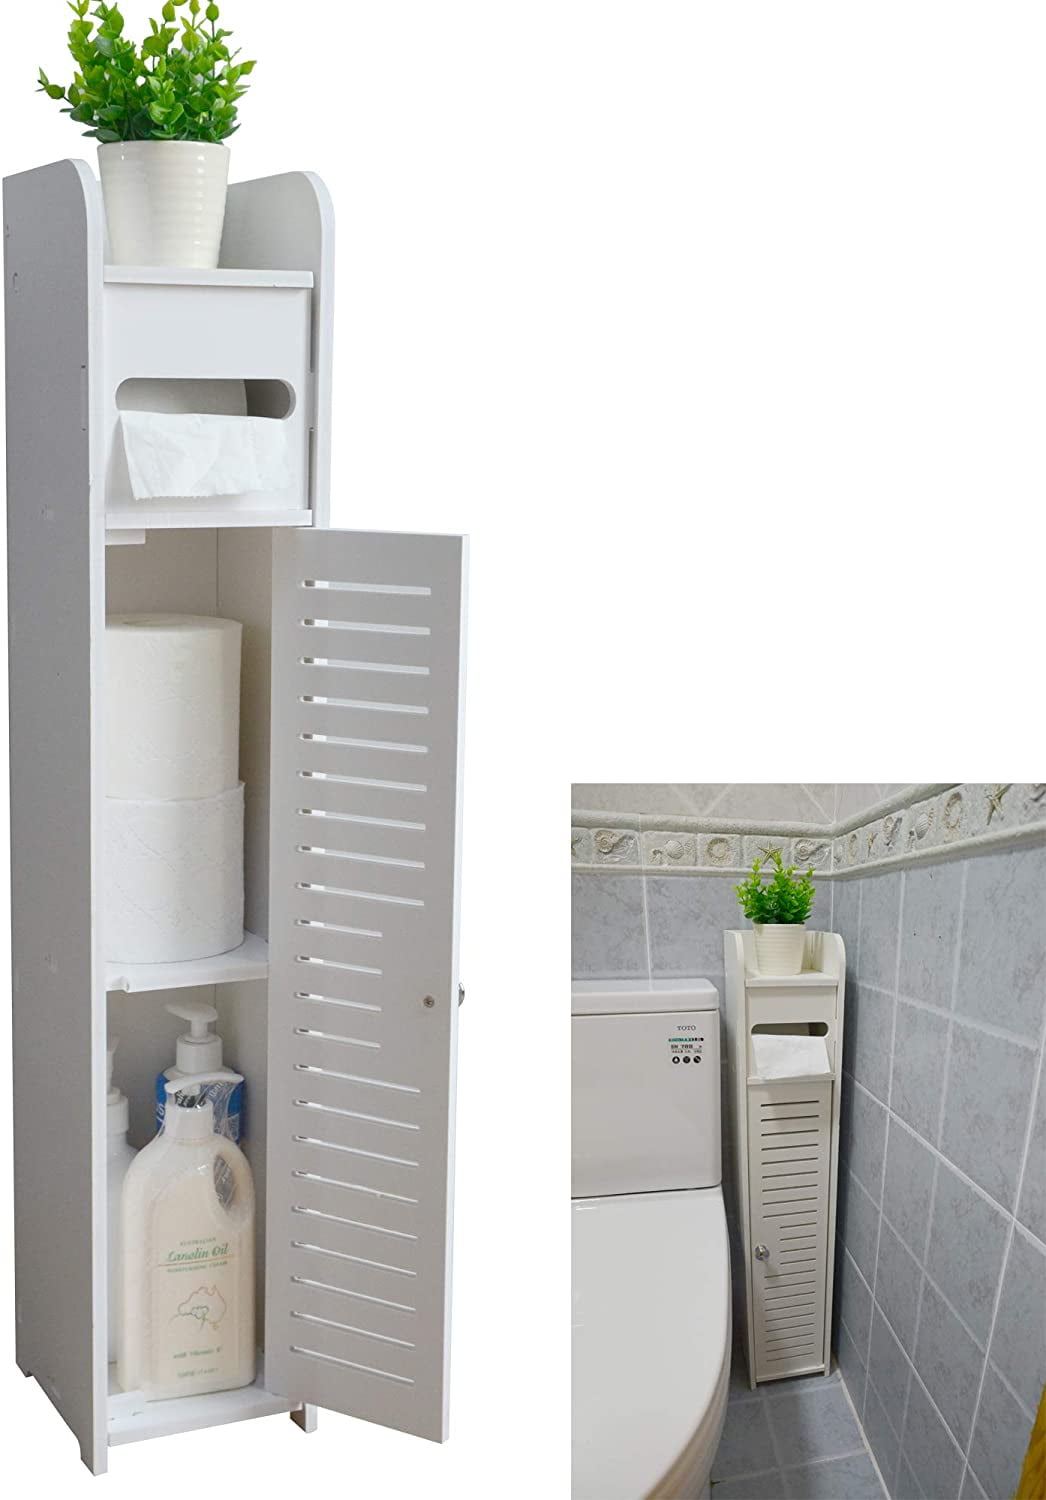 Small Bathroom Storage Corner Floor, White Cabinet With Doors And Shelves